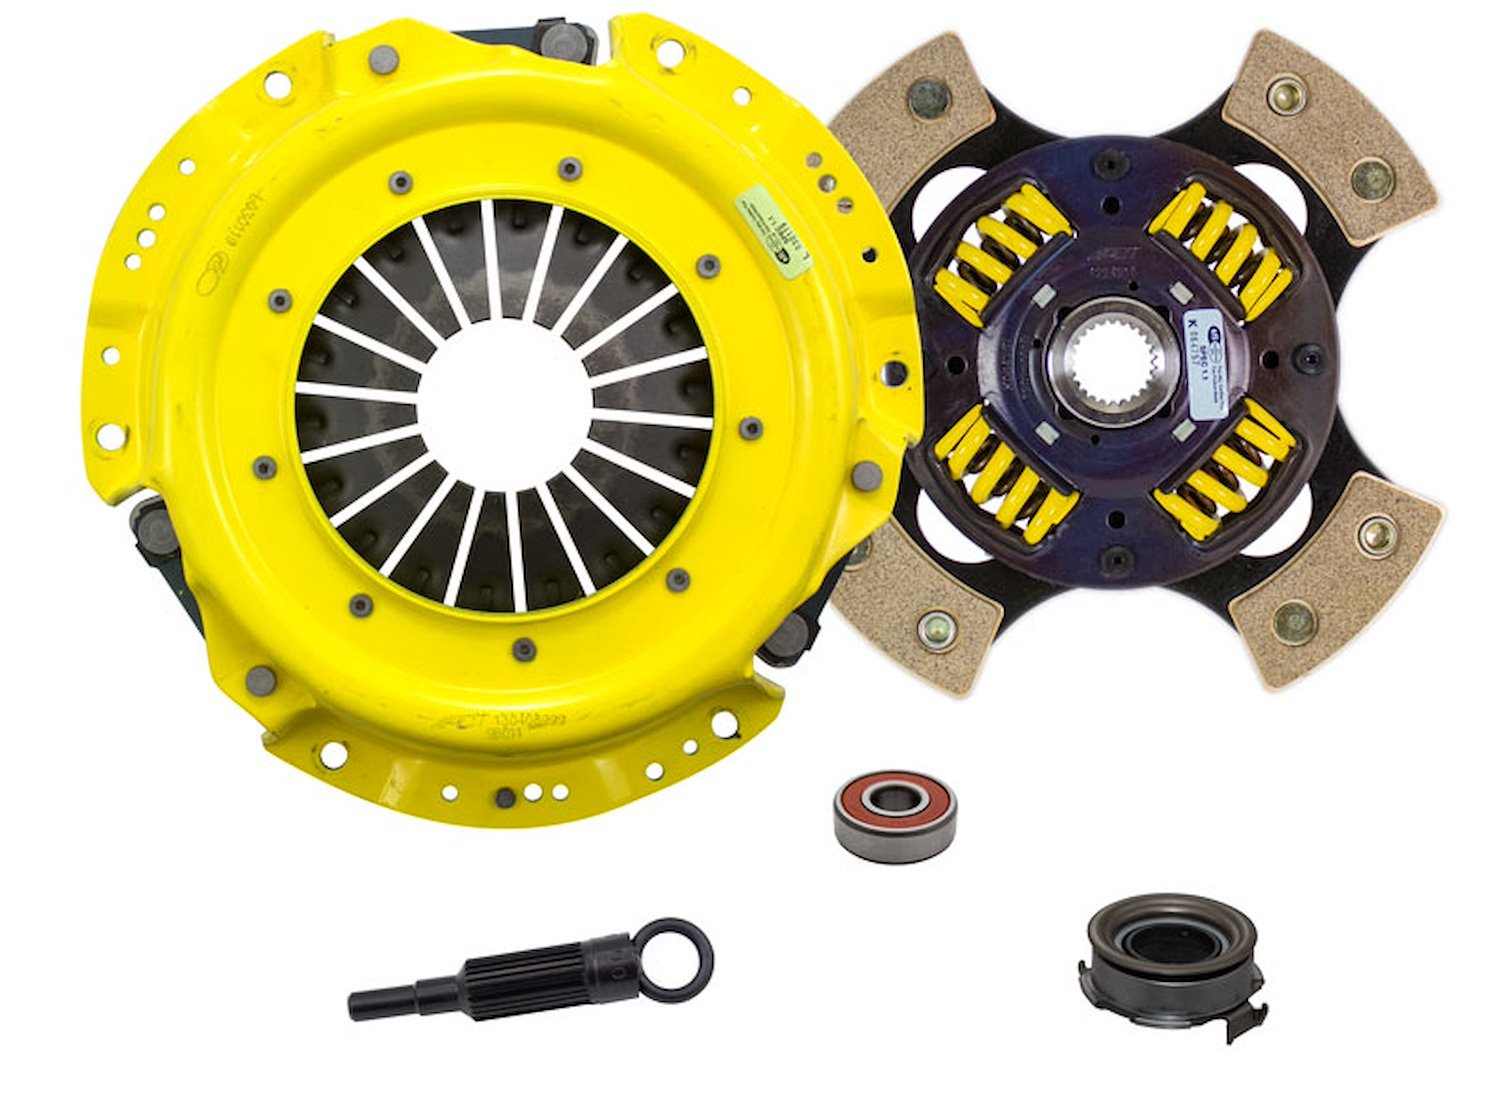 HD/Race Sprung 4-Pad Transmission Clutch Kit Fits Select Multiple Makes/Models